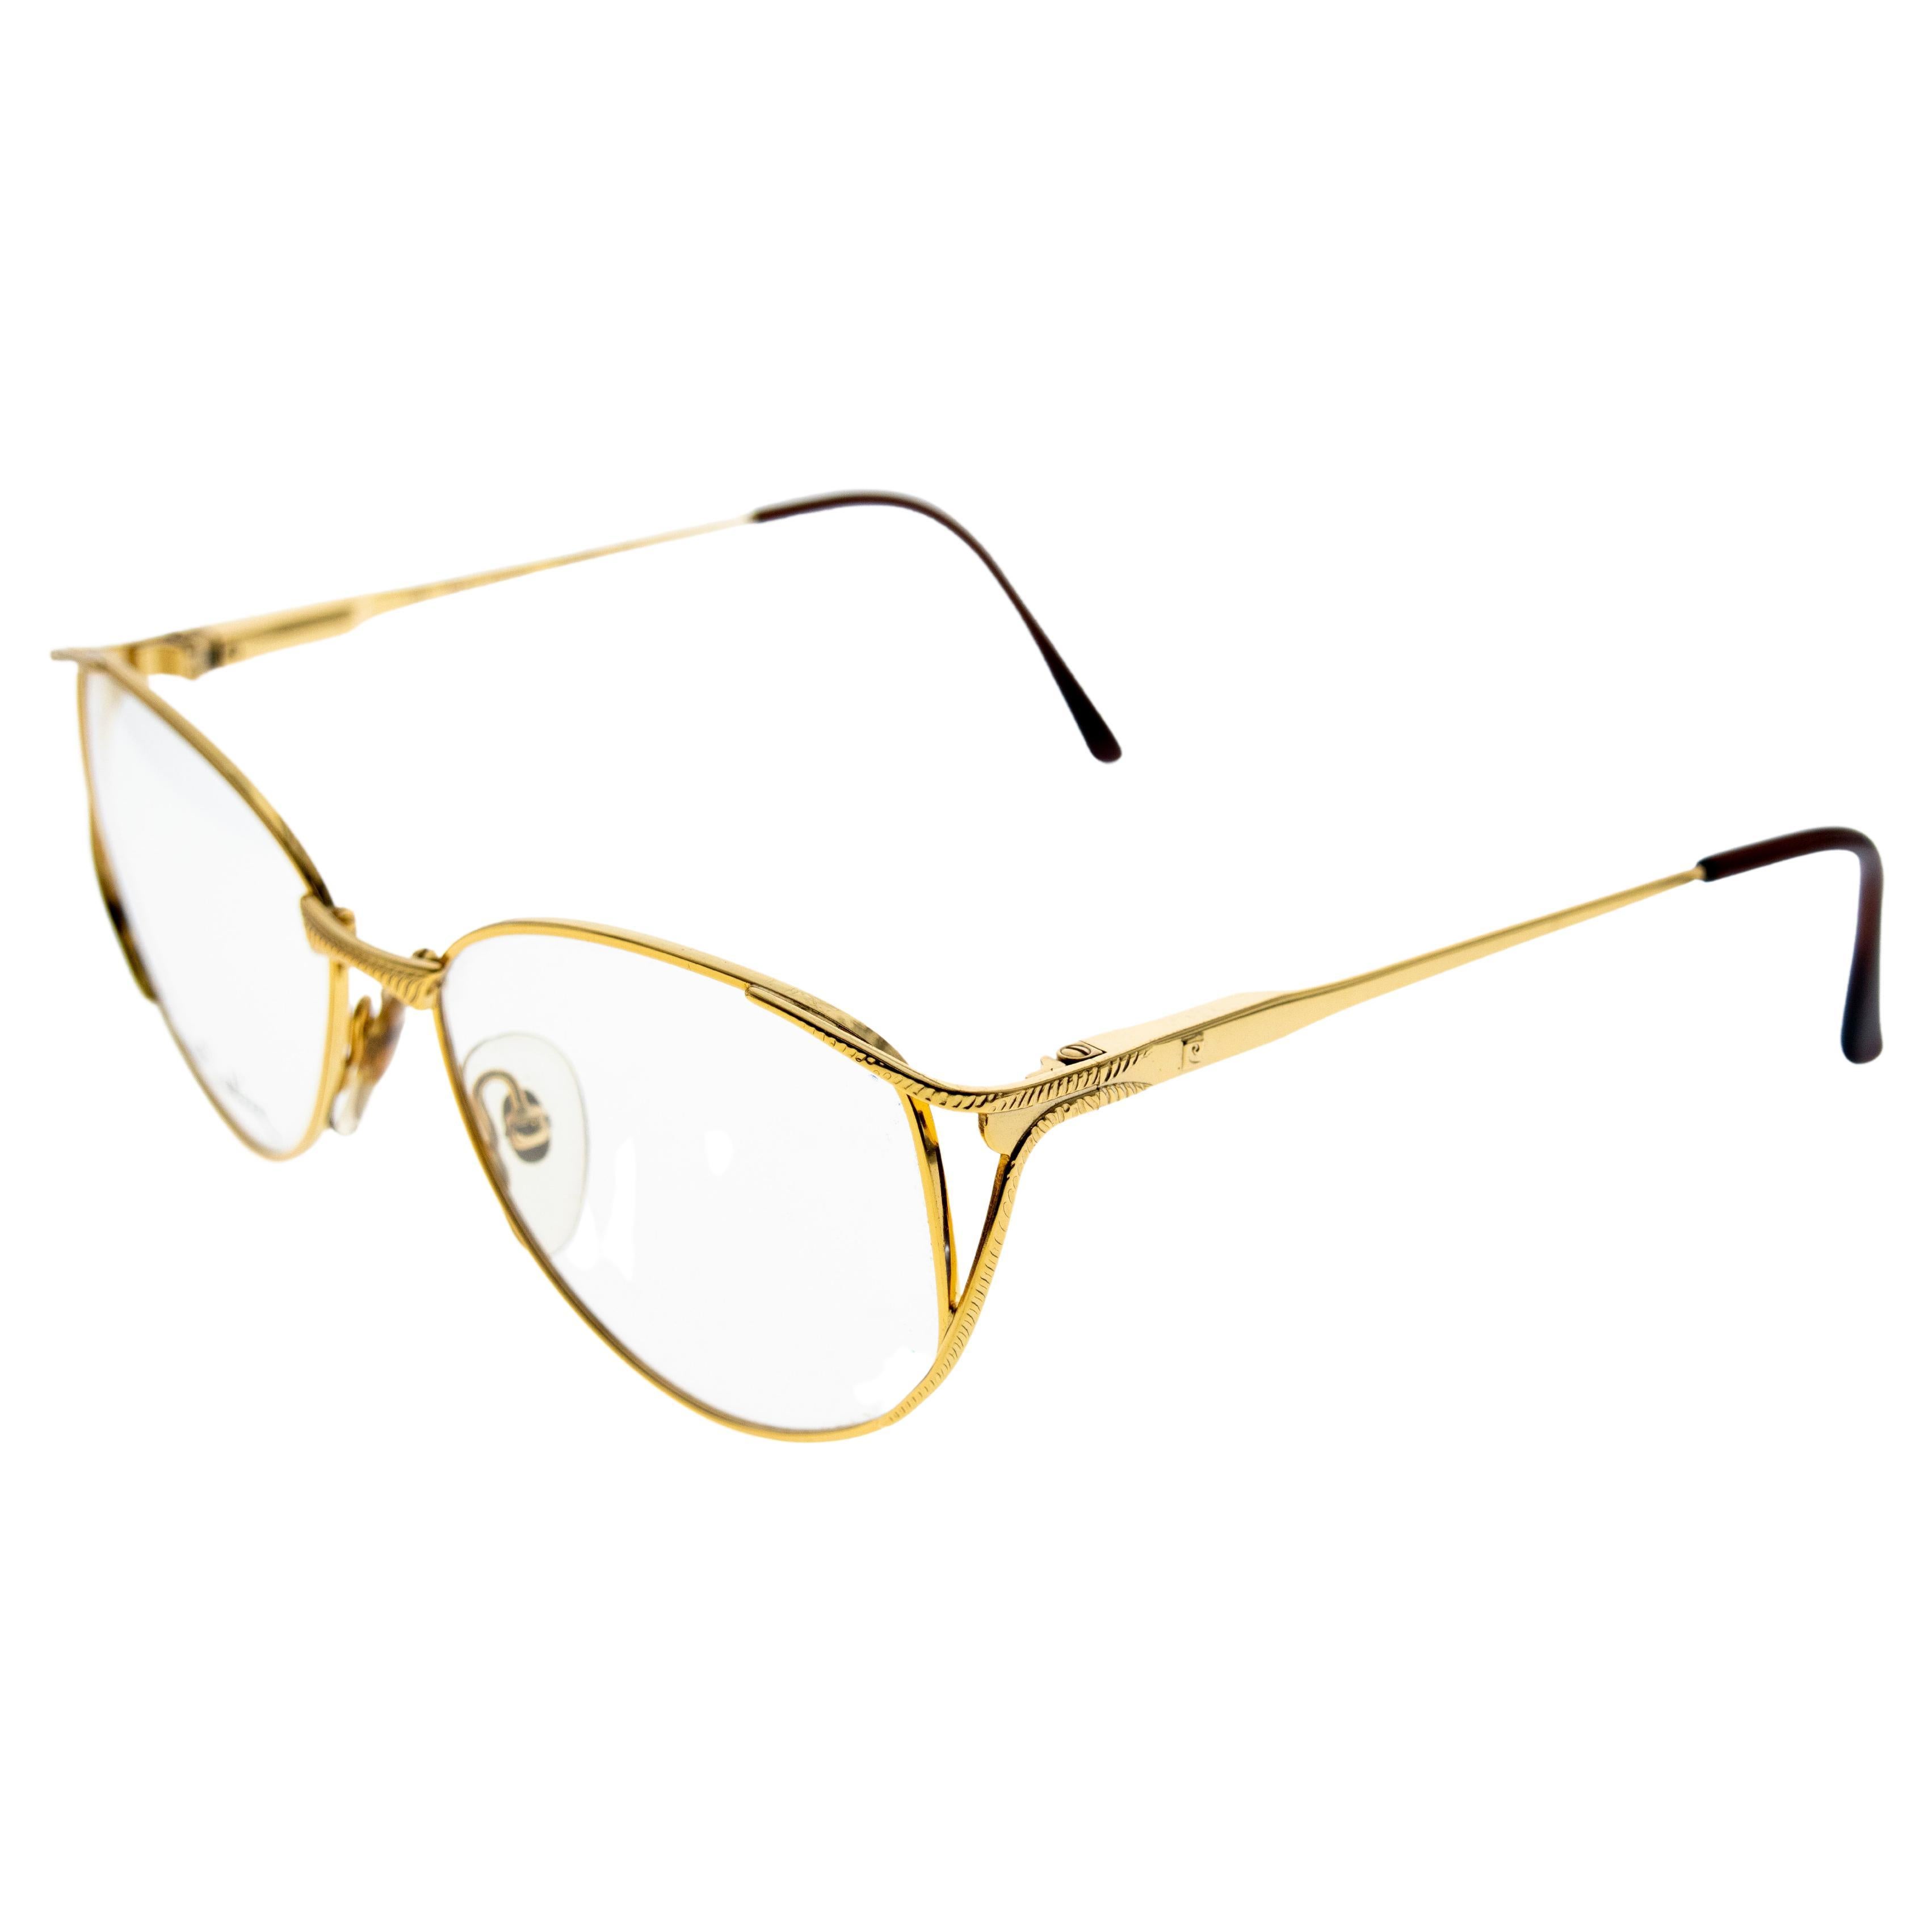 Beautifully designed optical frame, by Pierre Cardin himself. His influence in French design is impossible to deny and it radiates through the frame. 